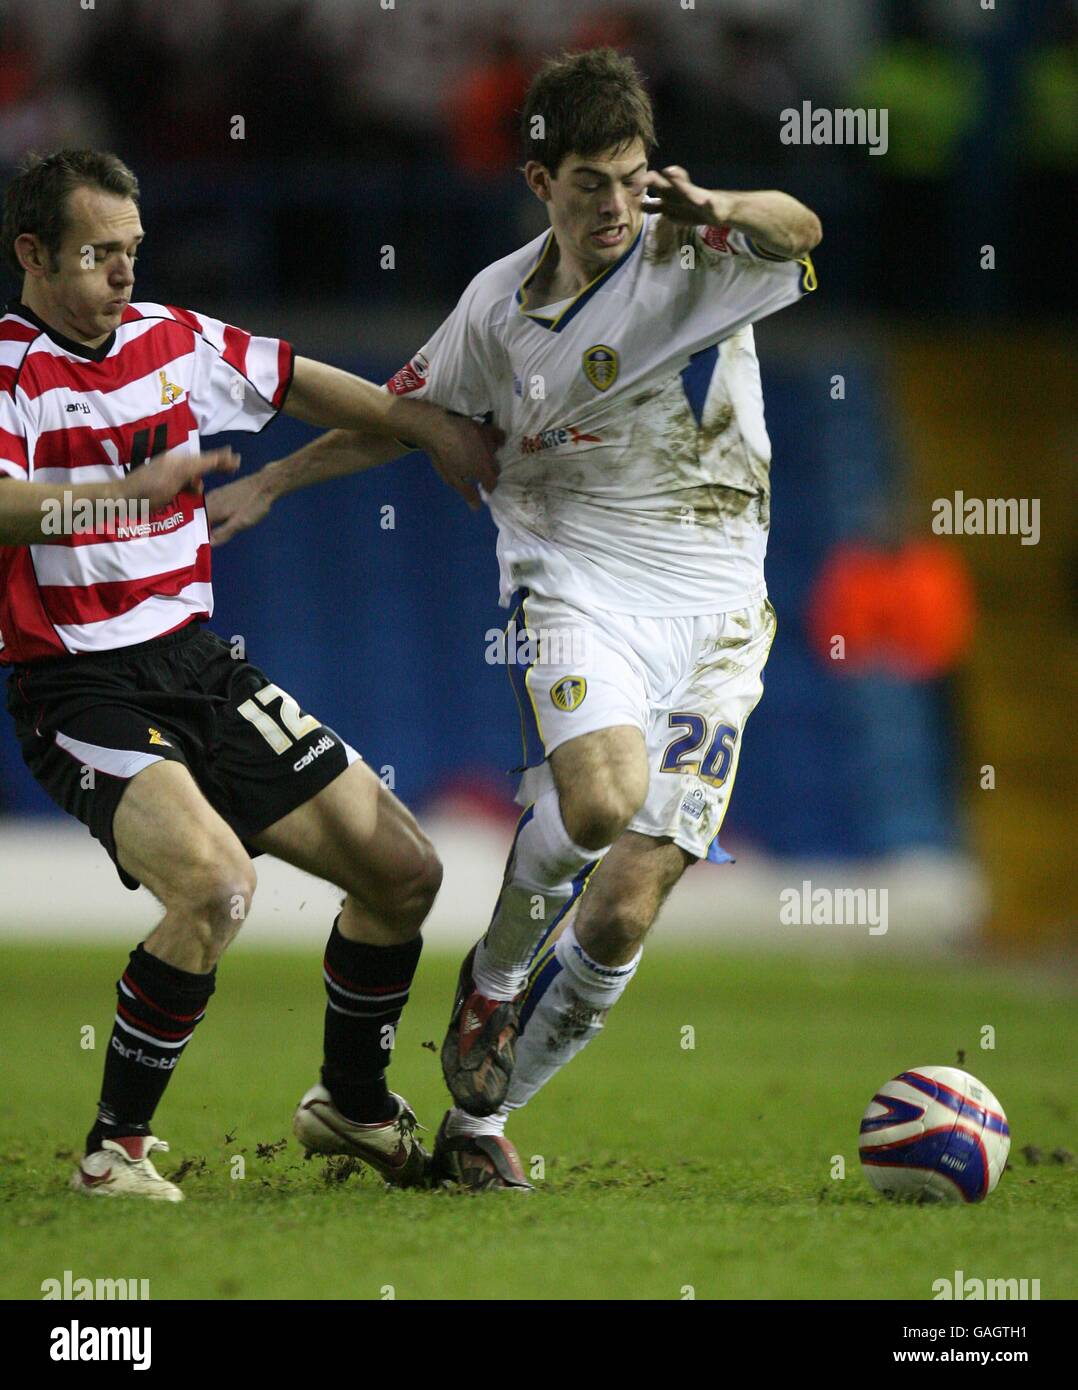 Doncaster Rovers' James Hayter and Leeds United's Ben Parker battle for the ball Stock Photo